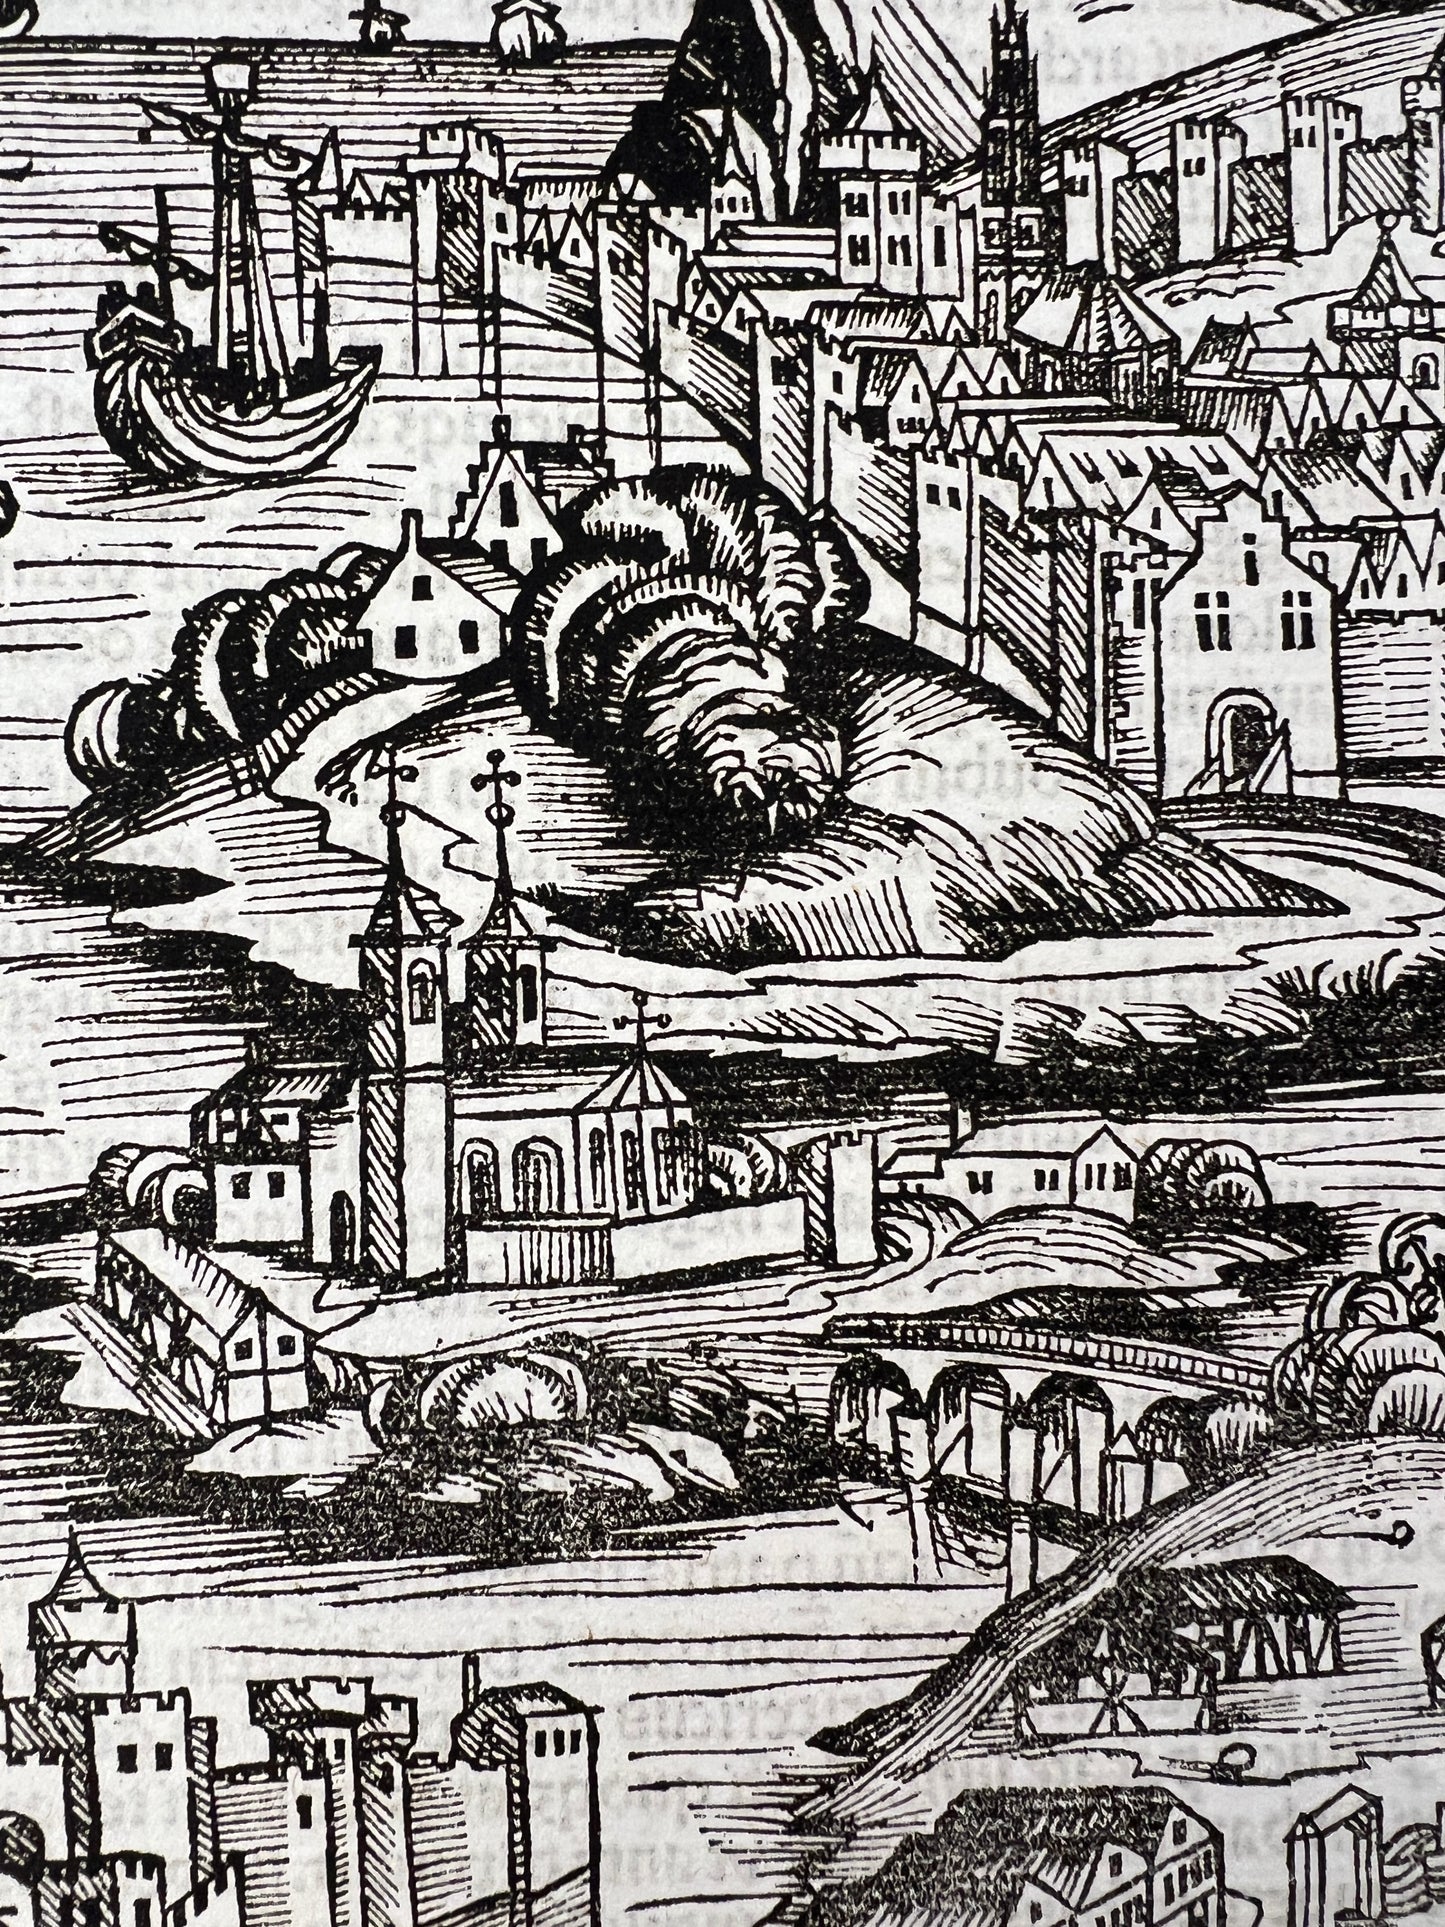 1493 Incunabula Leaf From the Nuremberg Chronicle of Hartmann Schedel - View of Bavaria, Germany